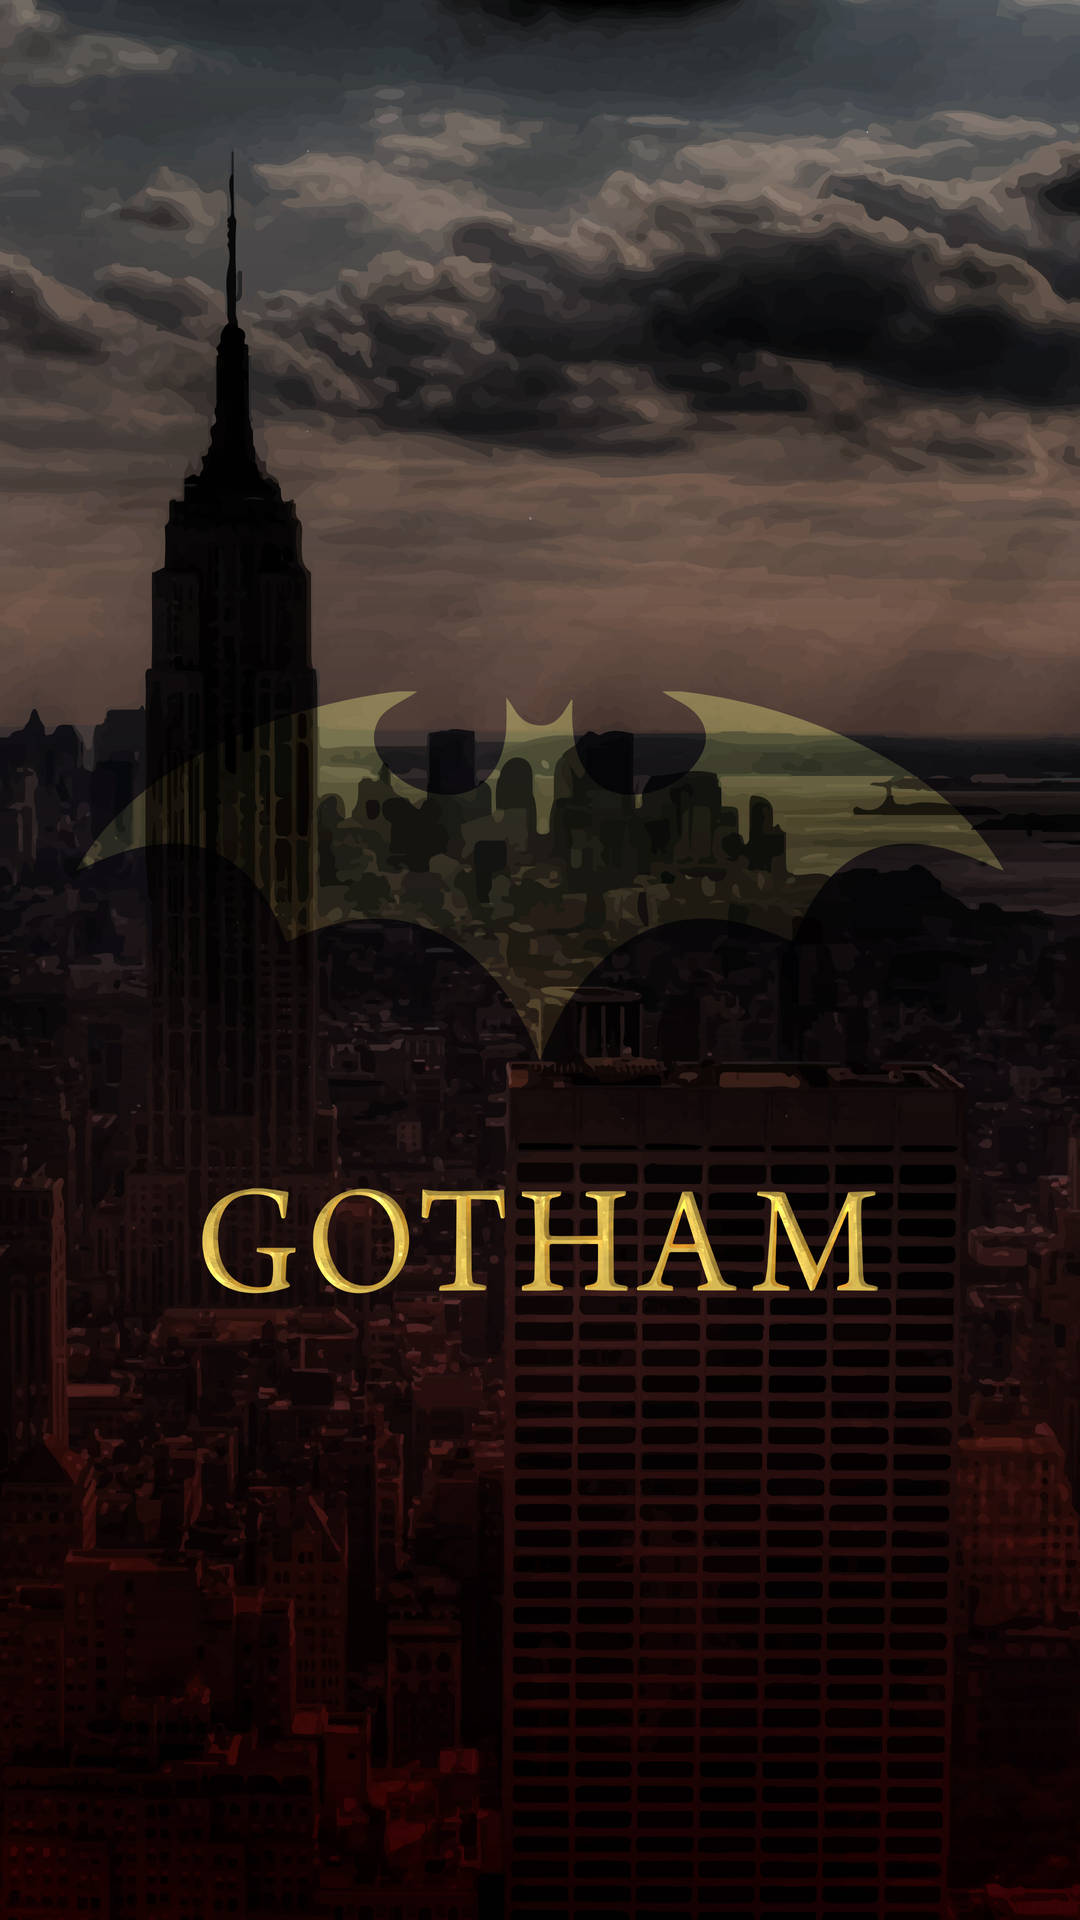 1080x1920  1080x1920 gotham tv shows hd 5k for Iphone 6 7 8 wallpaper   Coolwallpapersme